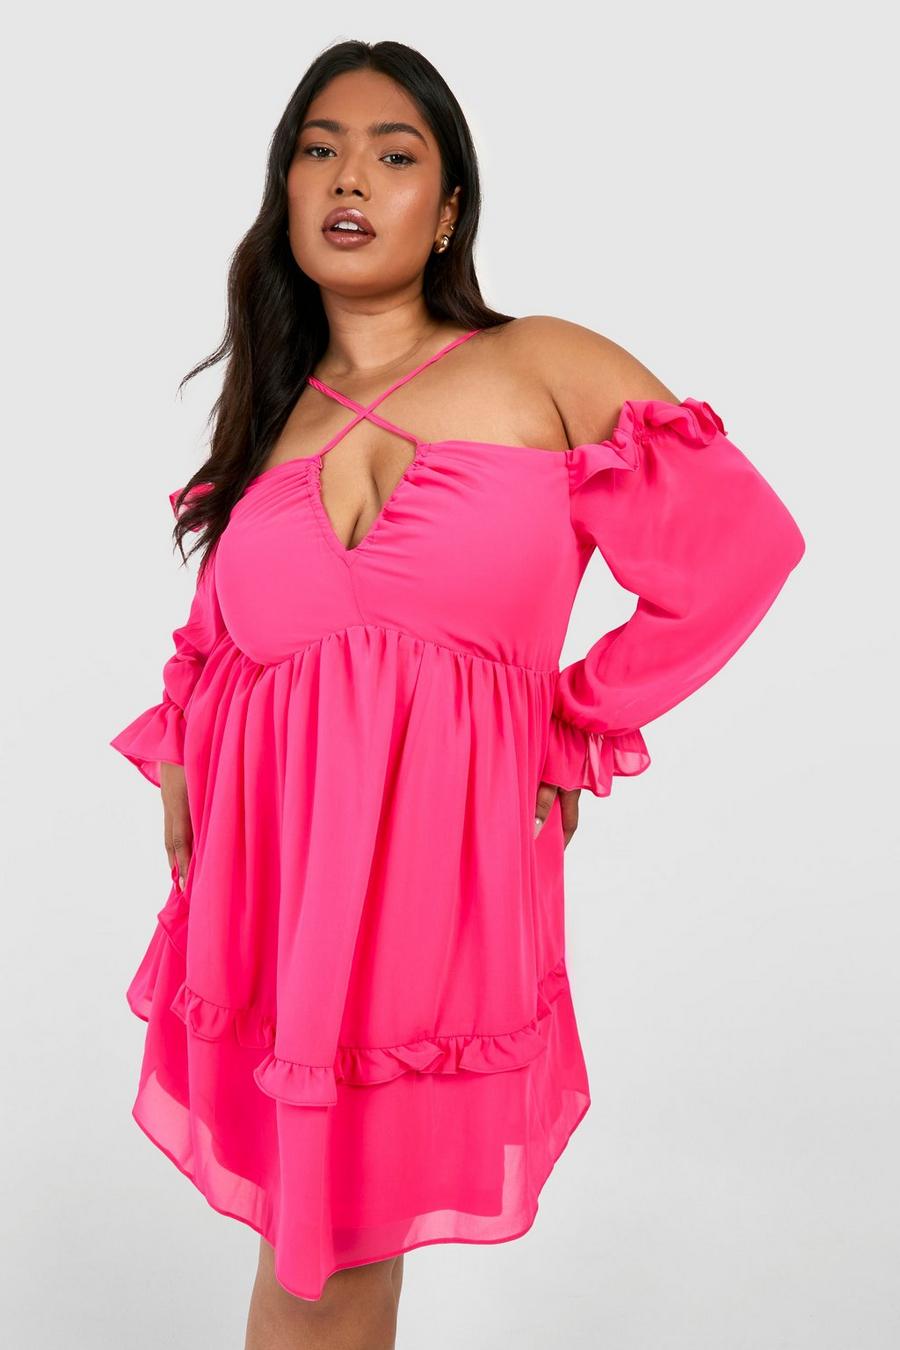 Grande taille - Robe patineuse à col croisé, Hot pink